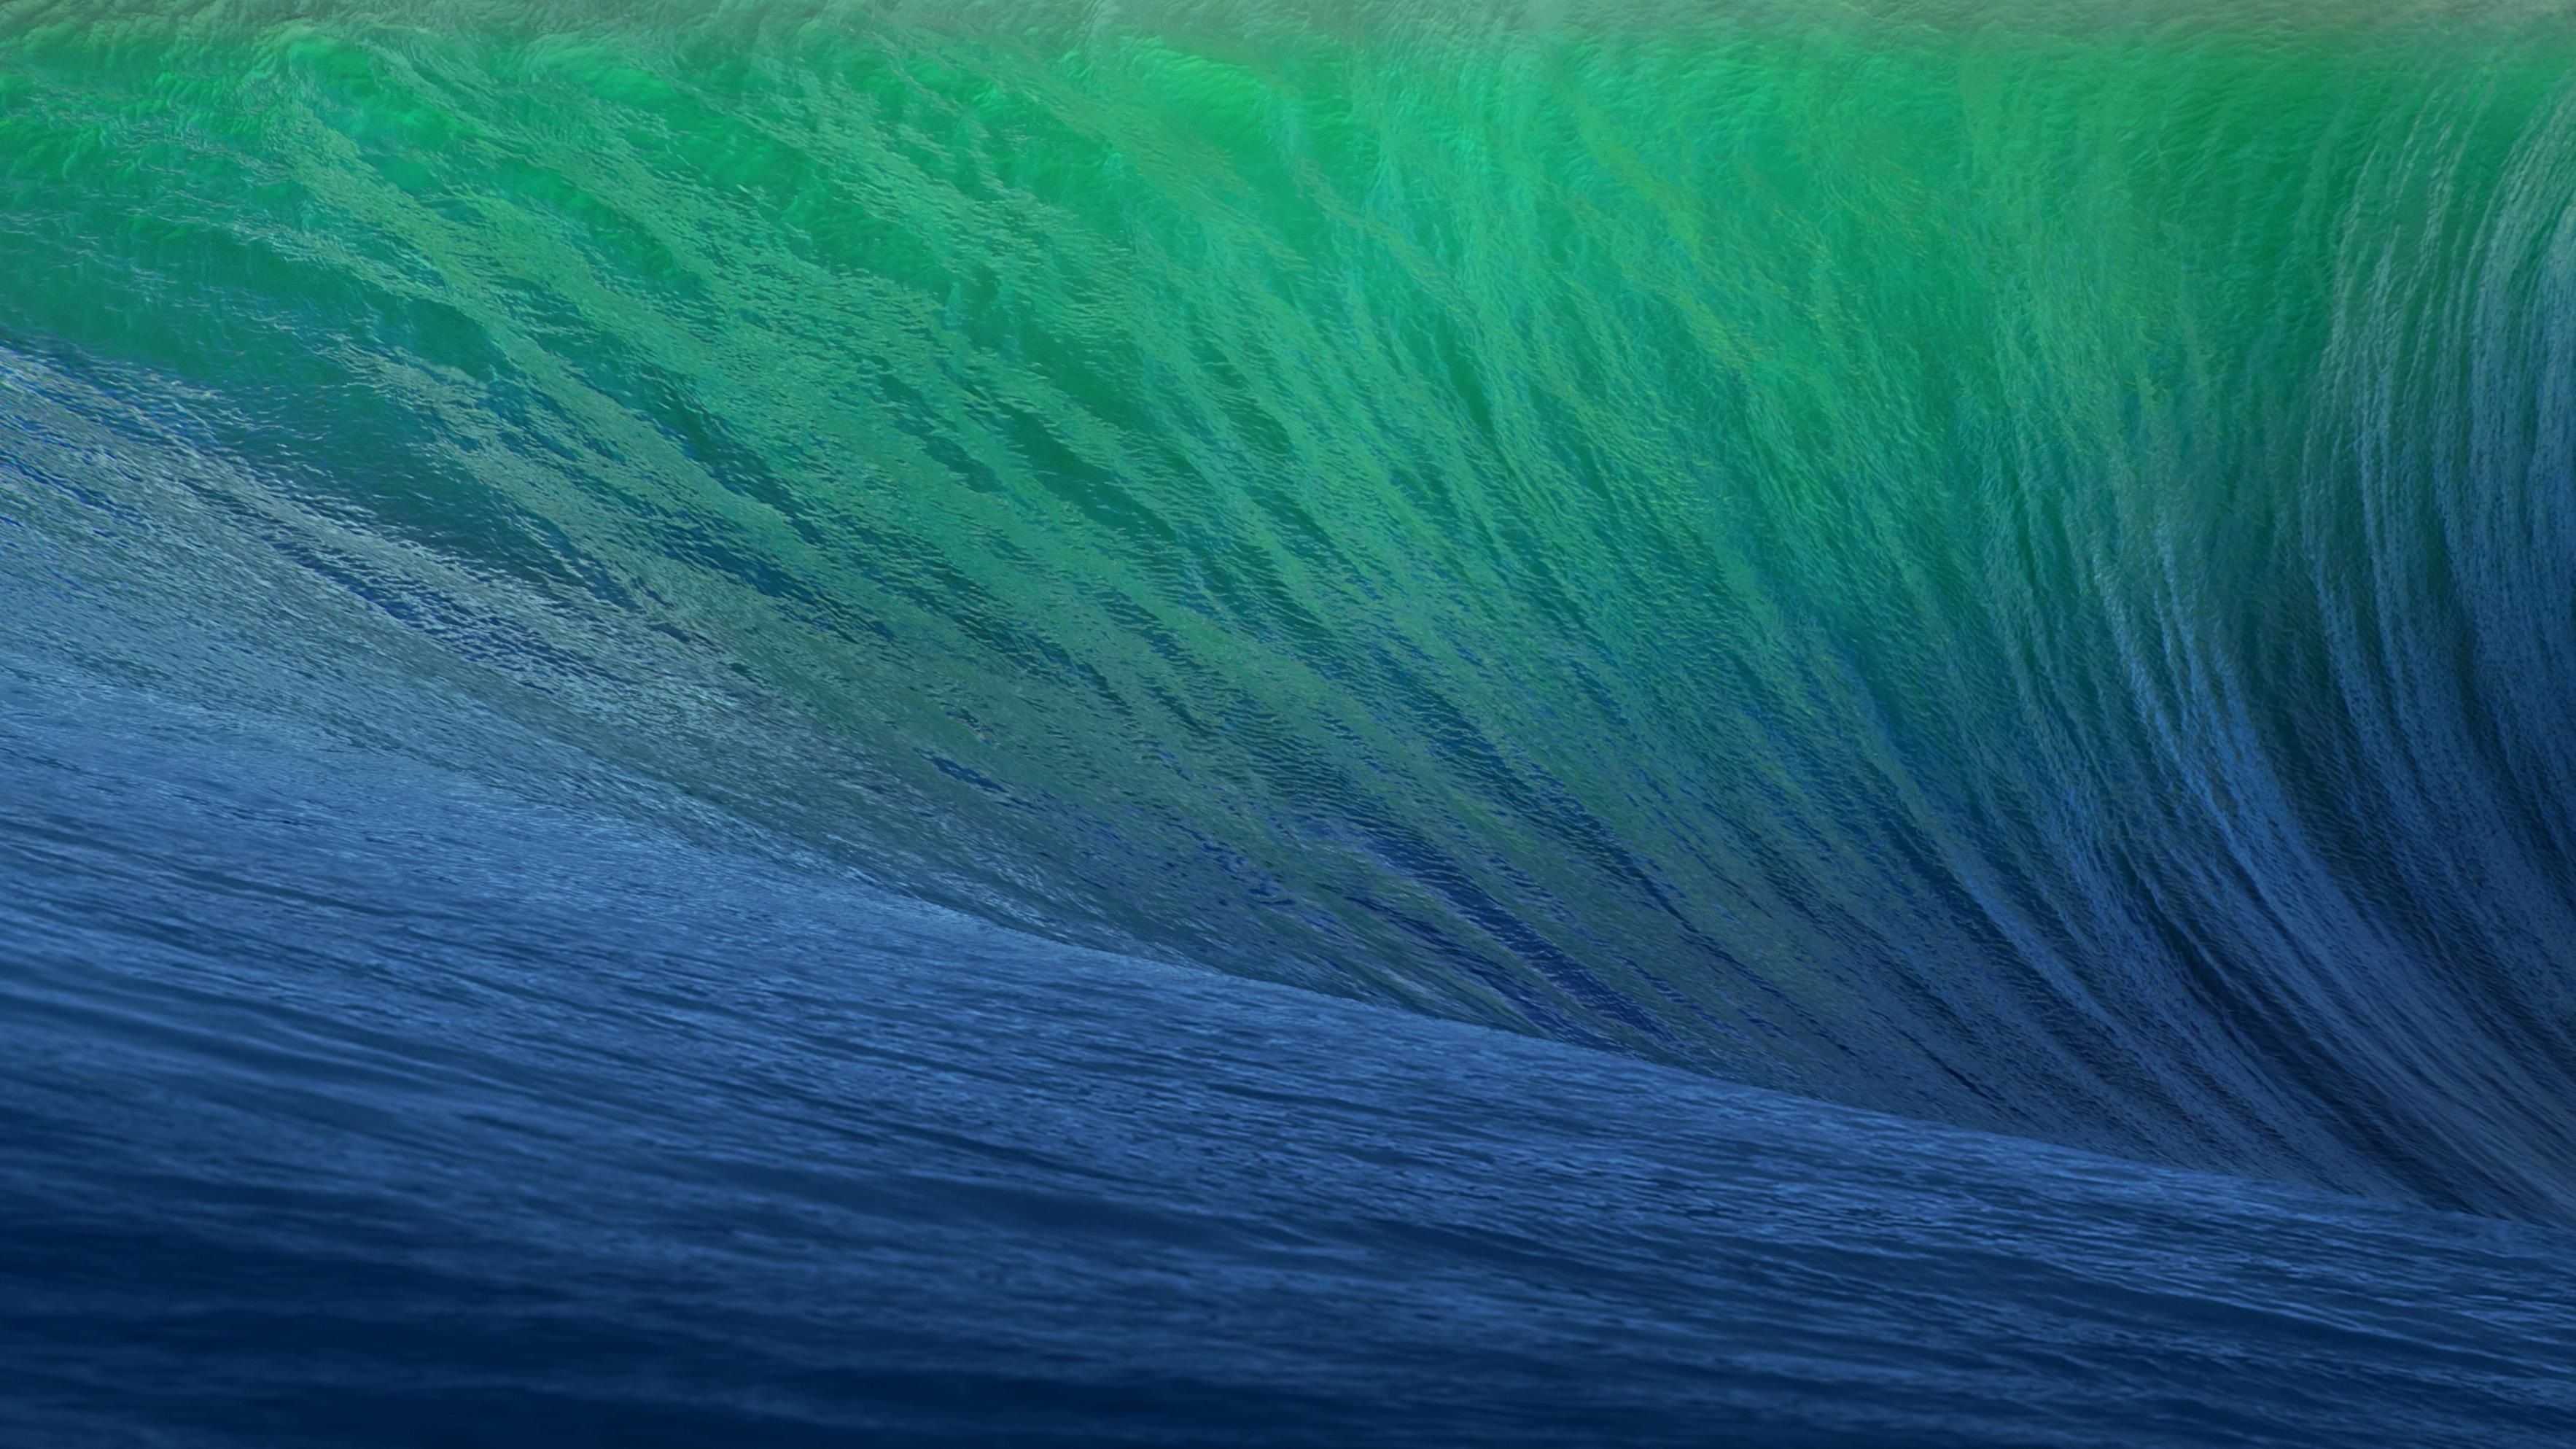 Mavericks desktop background picture settings moved from / Library